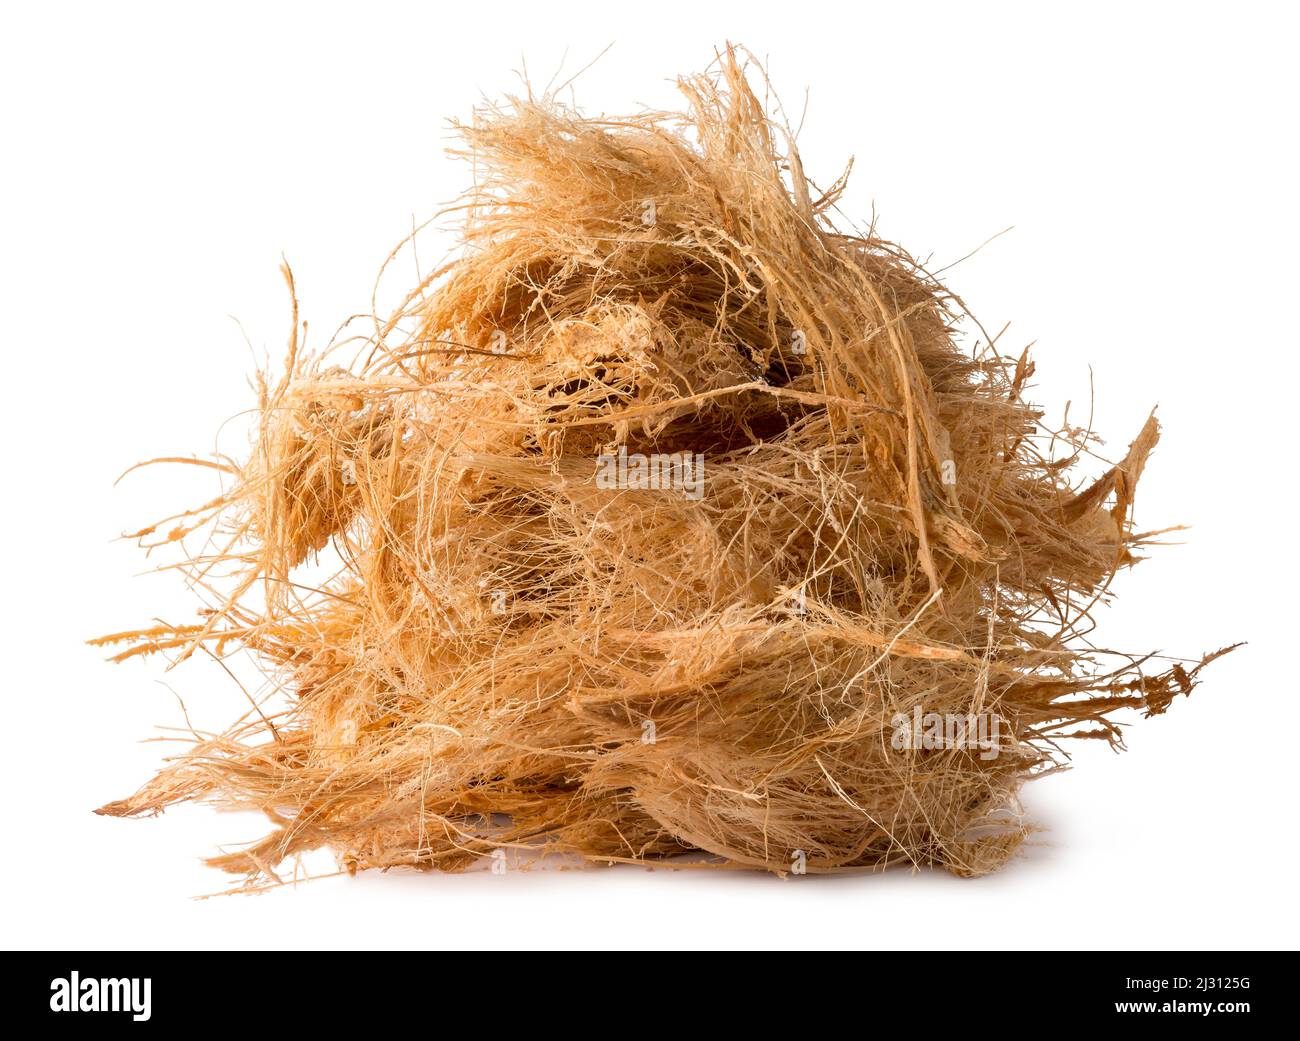 pile of coconut husk fiber or coir, commercially important natural fiber extracted from outer husk of coconut fruit,isolated on white background Stock Photo